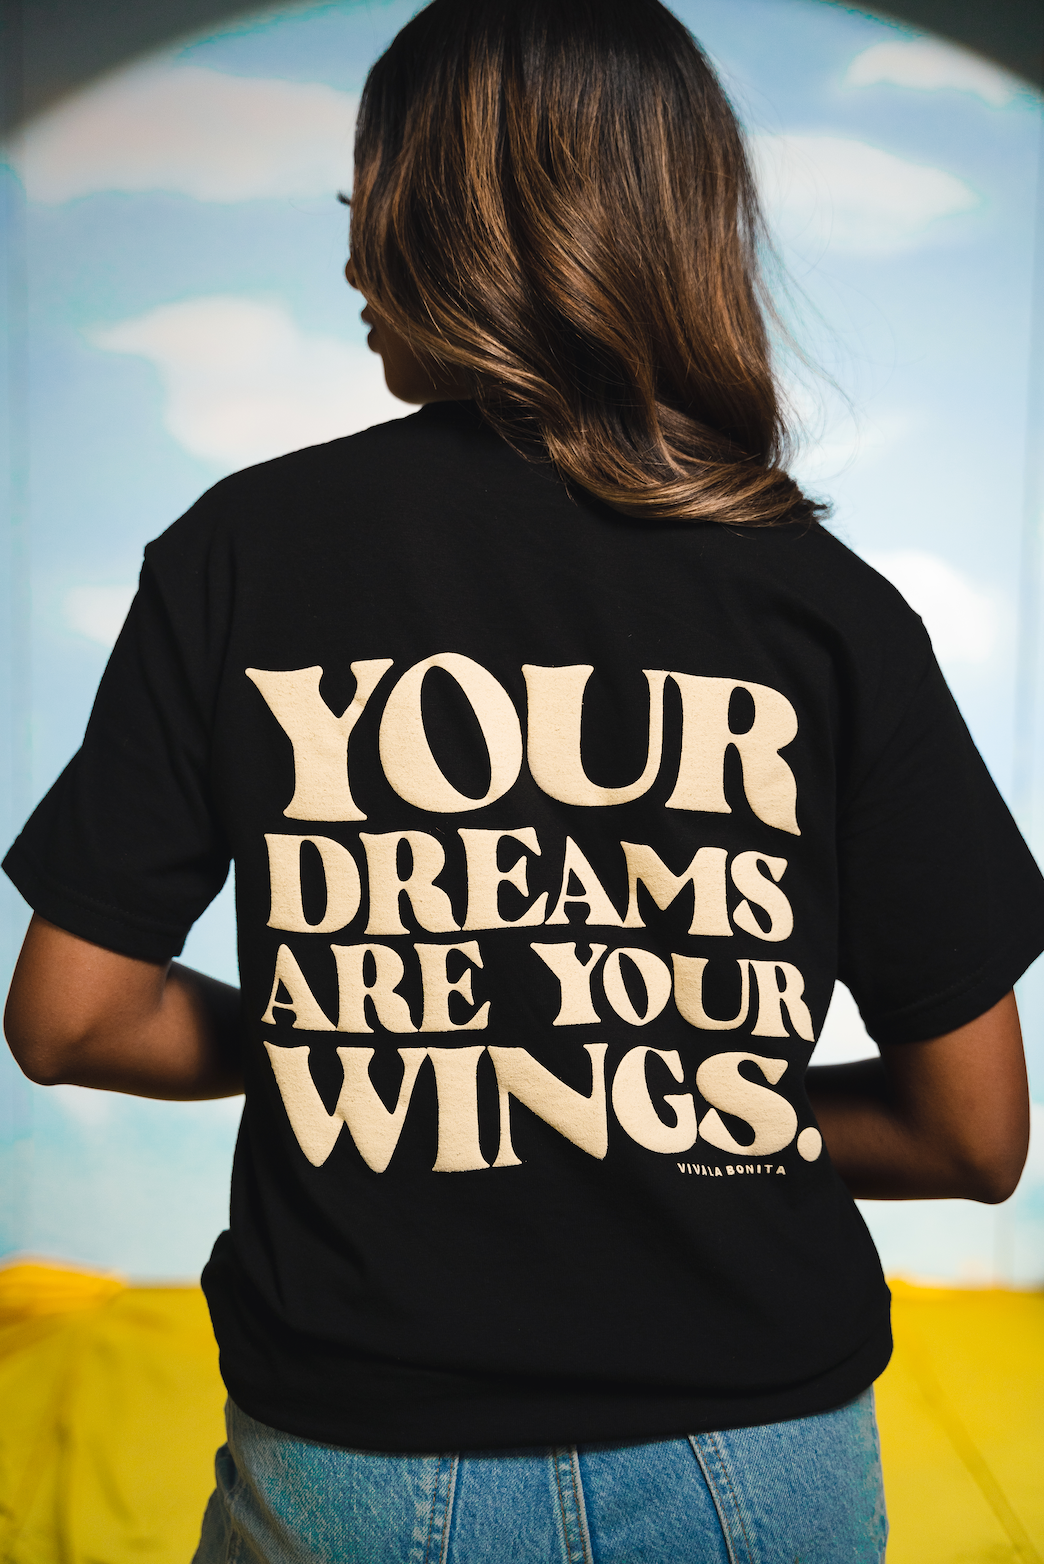 YOUR DREAMS ARE YOUR WINGS T-SHIRT